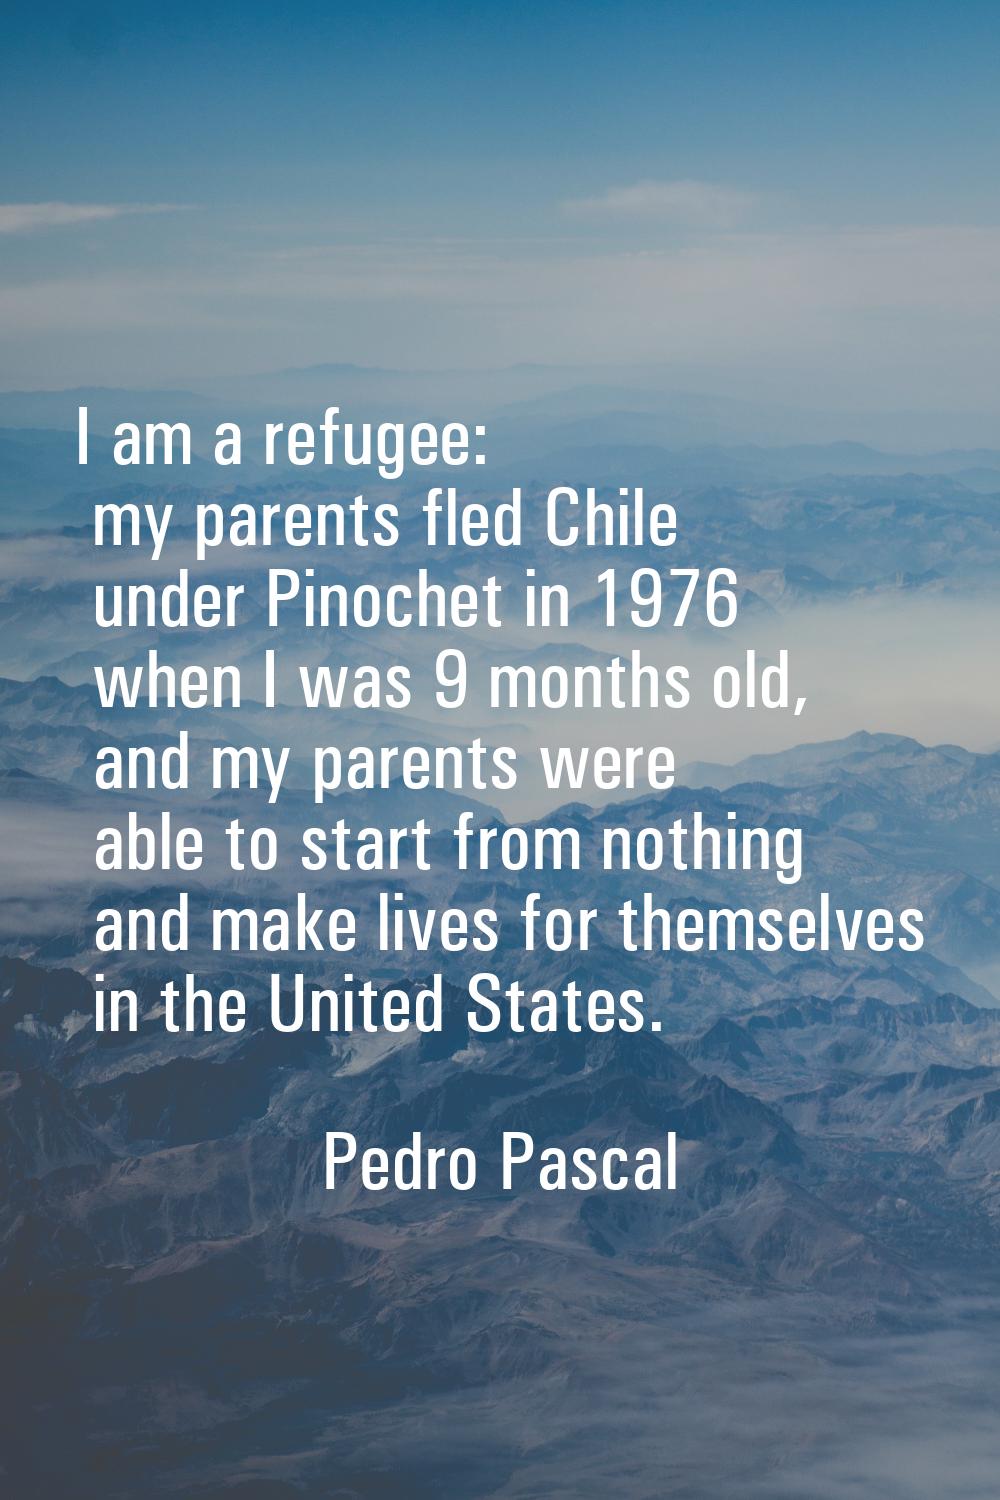 I am a refugee: my parents fled Chile under Pinochet in 1976 when I was 9 months old, and my parent